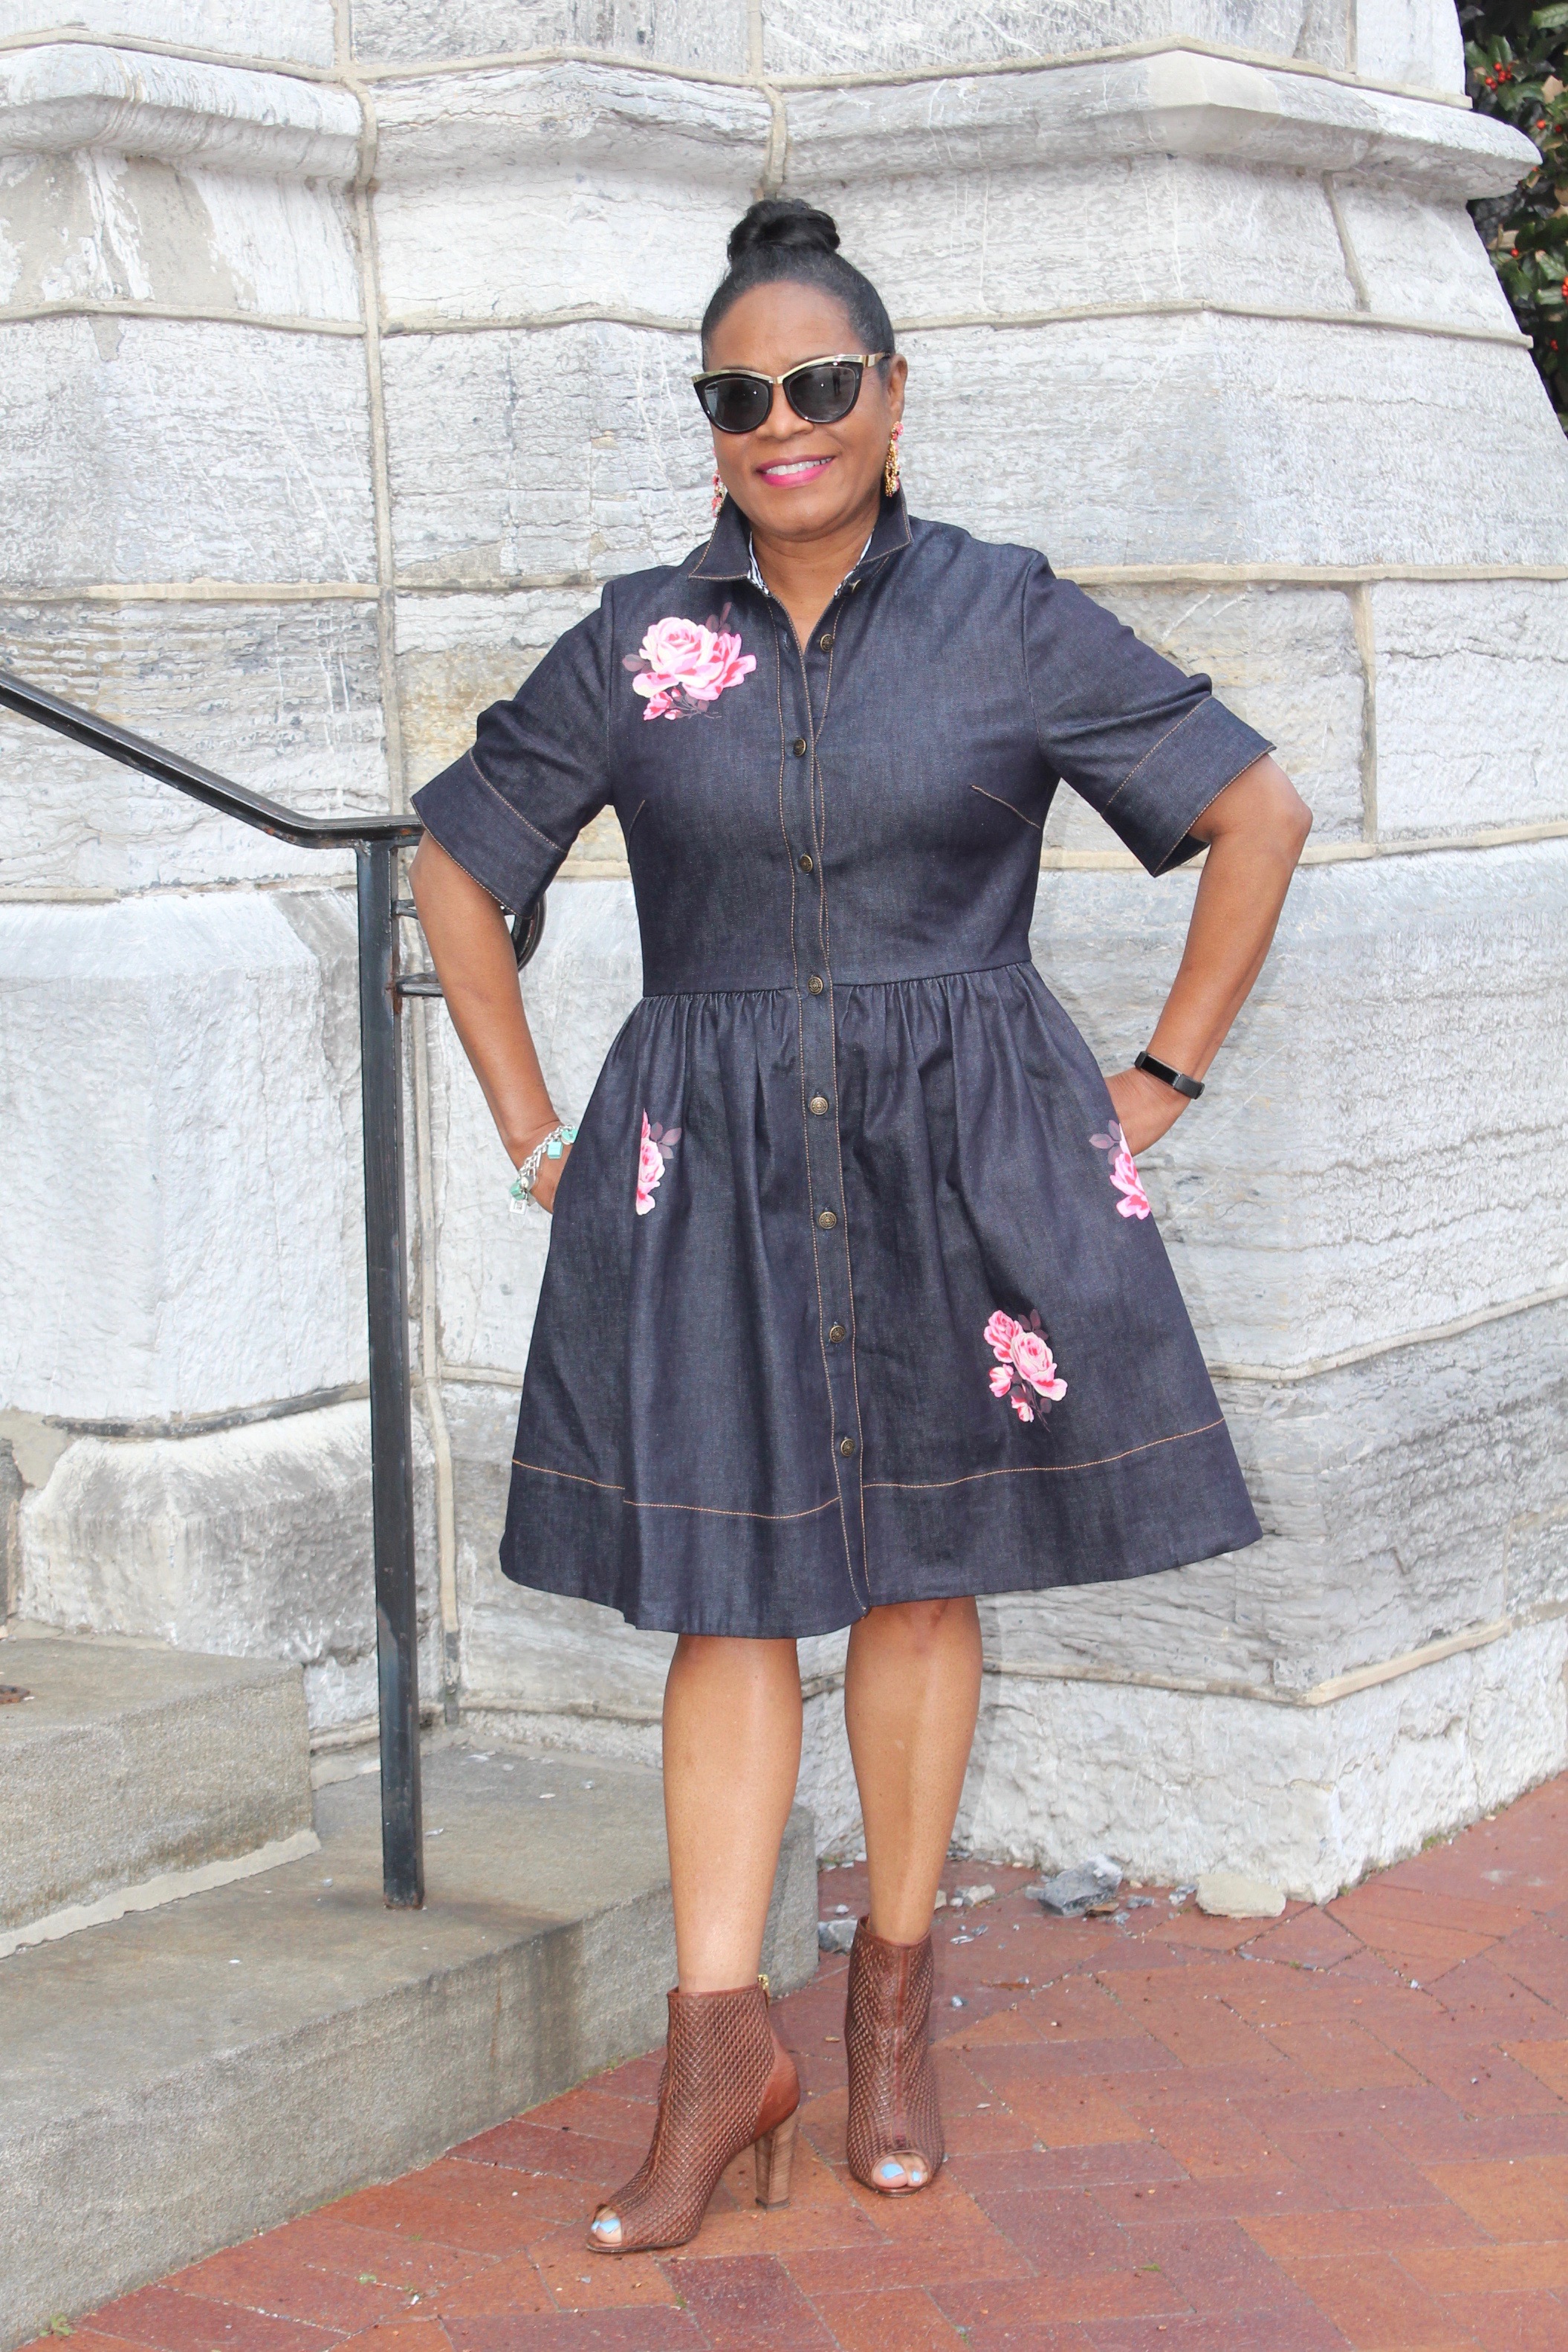 Ready for spring with Kate Spade Broome Street Denim Dress